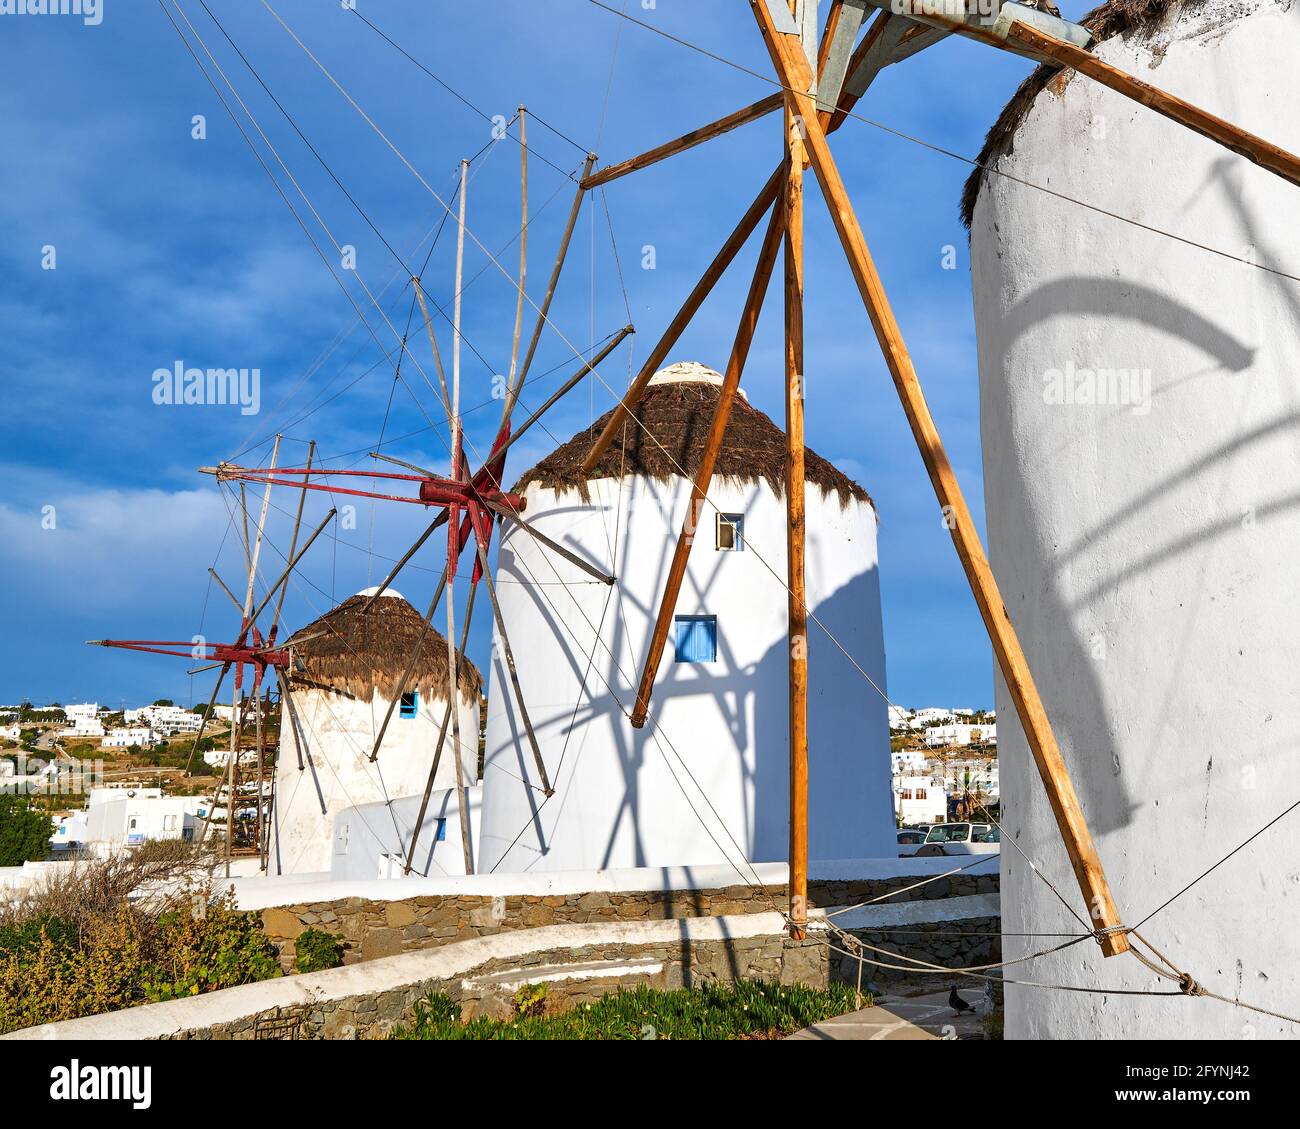 Famous tourist attraction of Mykonos, Greece. Traditional whitewashed windmills, summer, blue sky, beautiful clouds. Travel destination, iconic view. Stock Photo